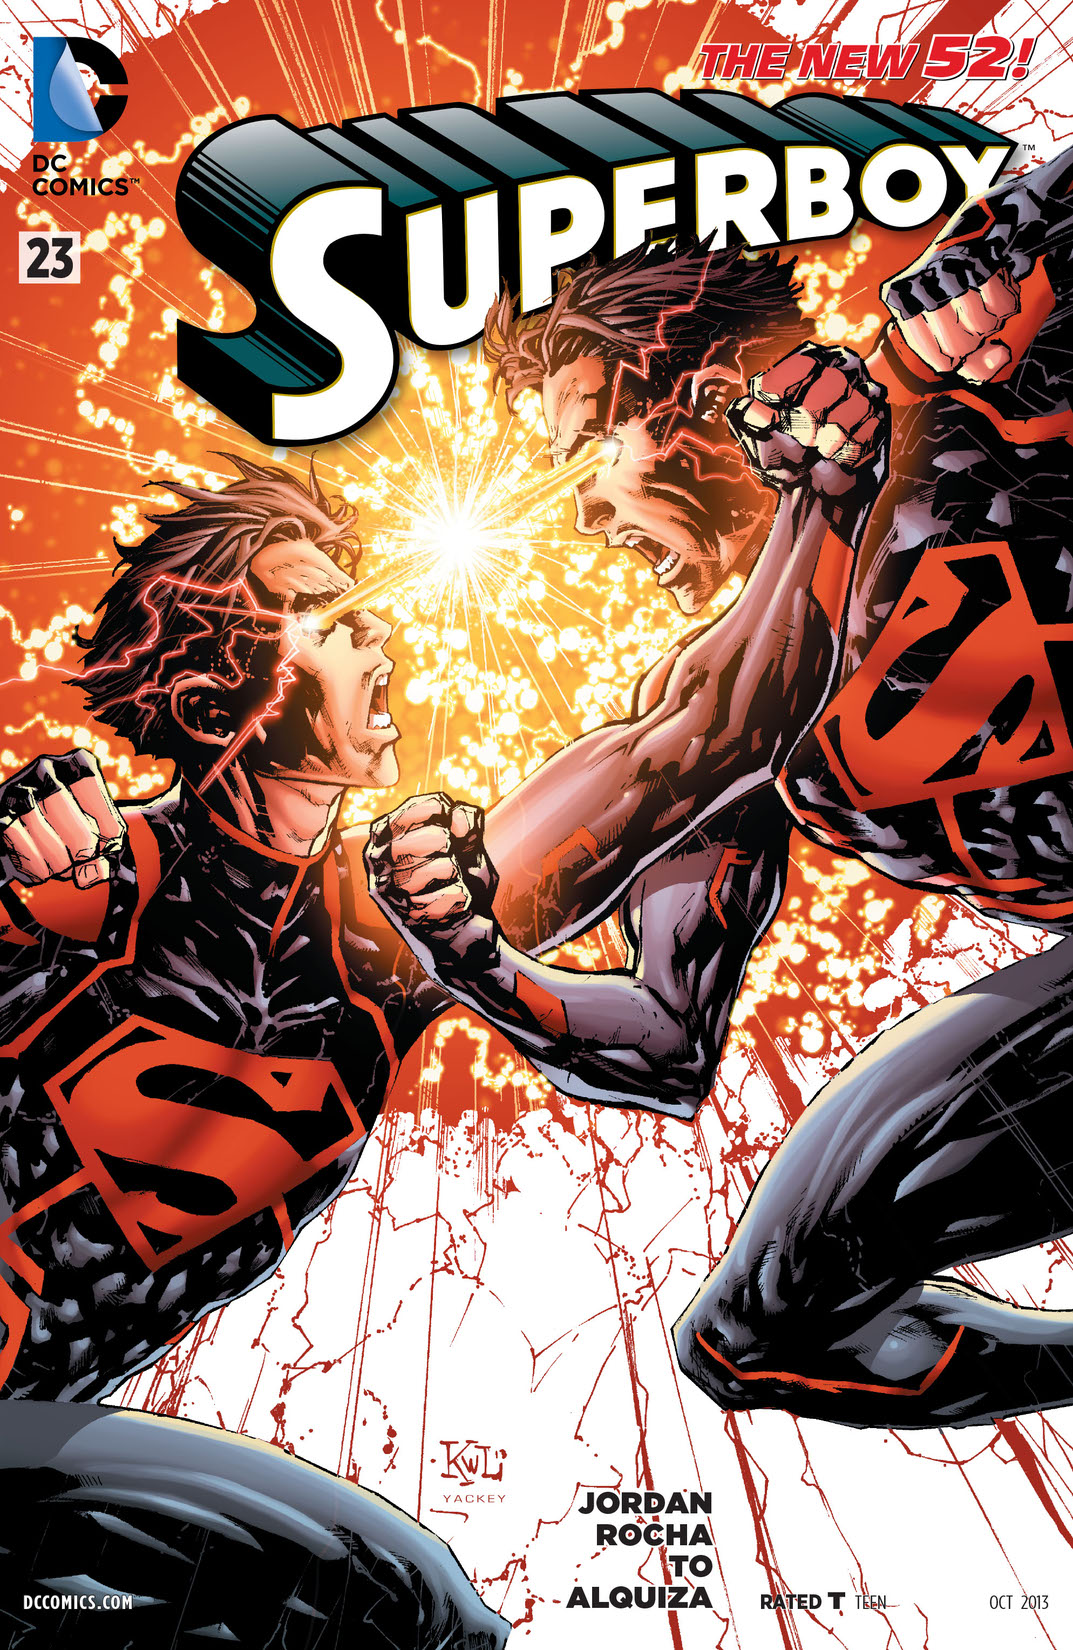 Superboy (2011-) #23 preview images